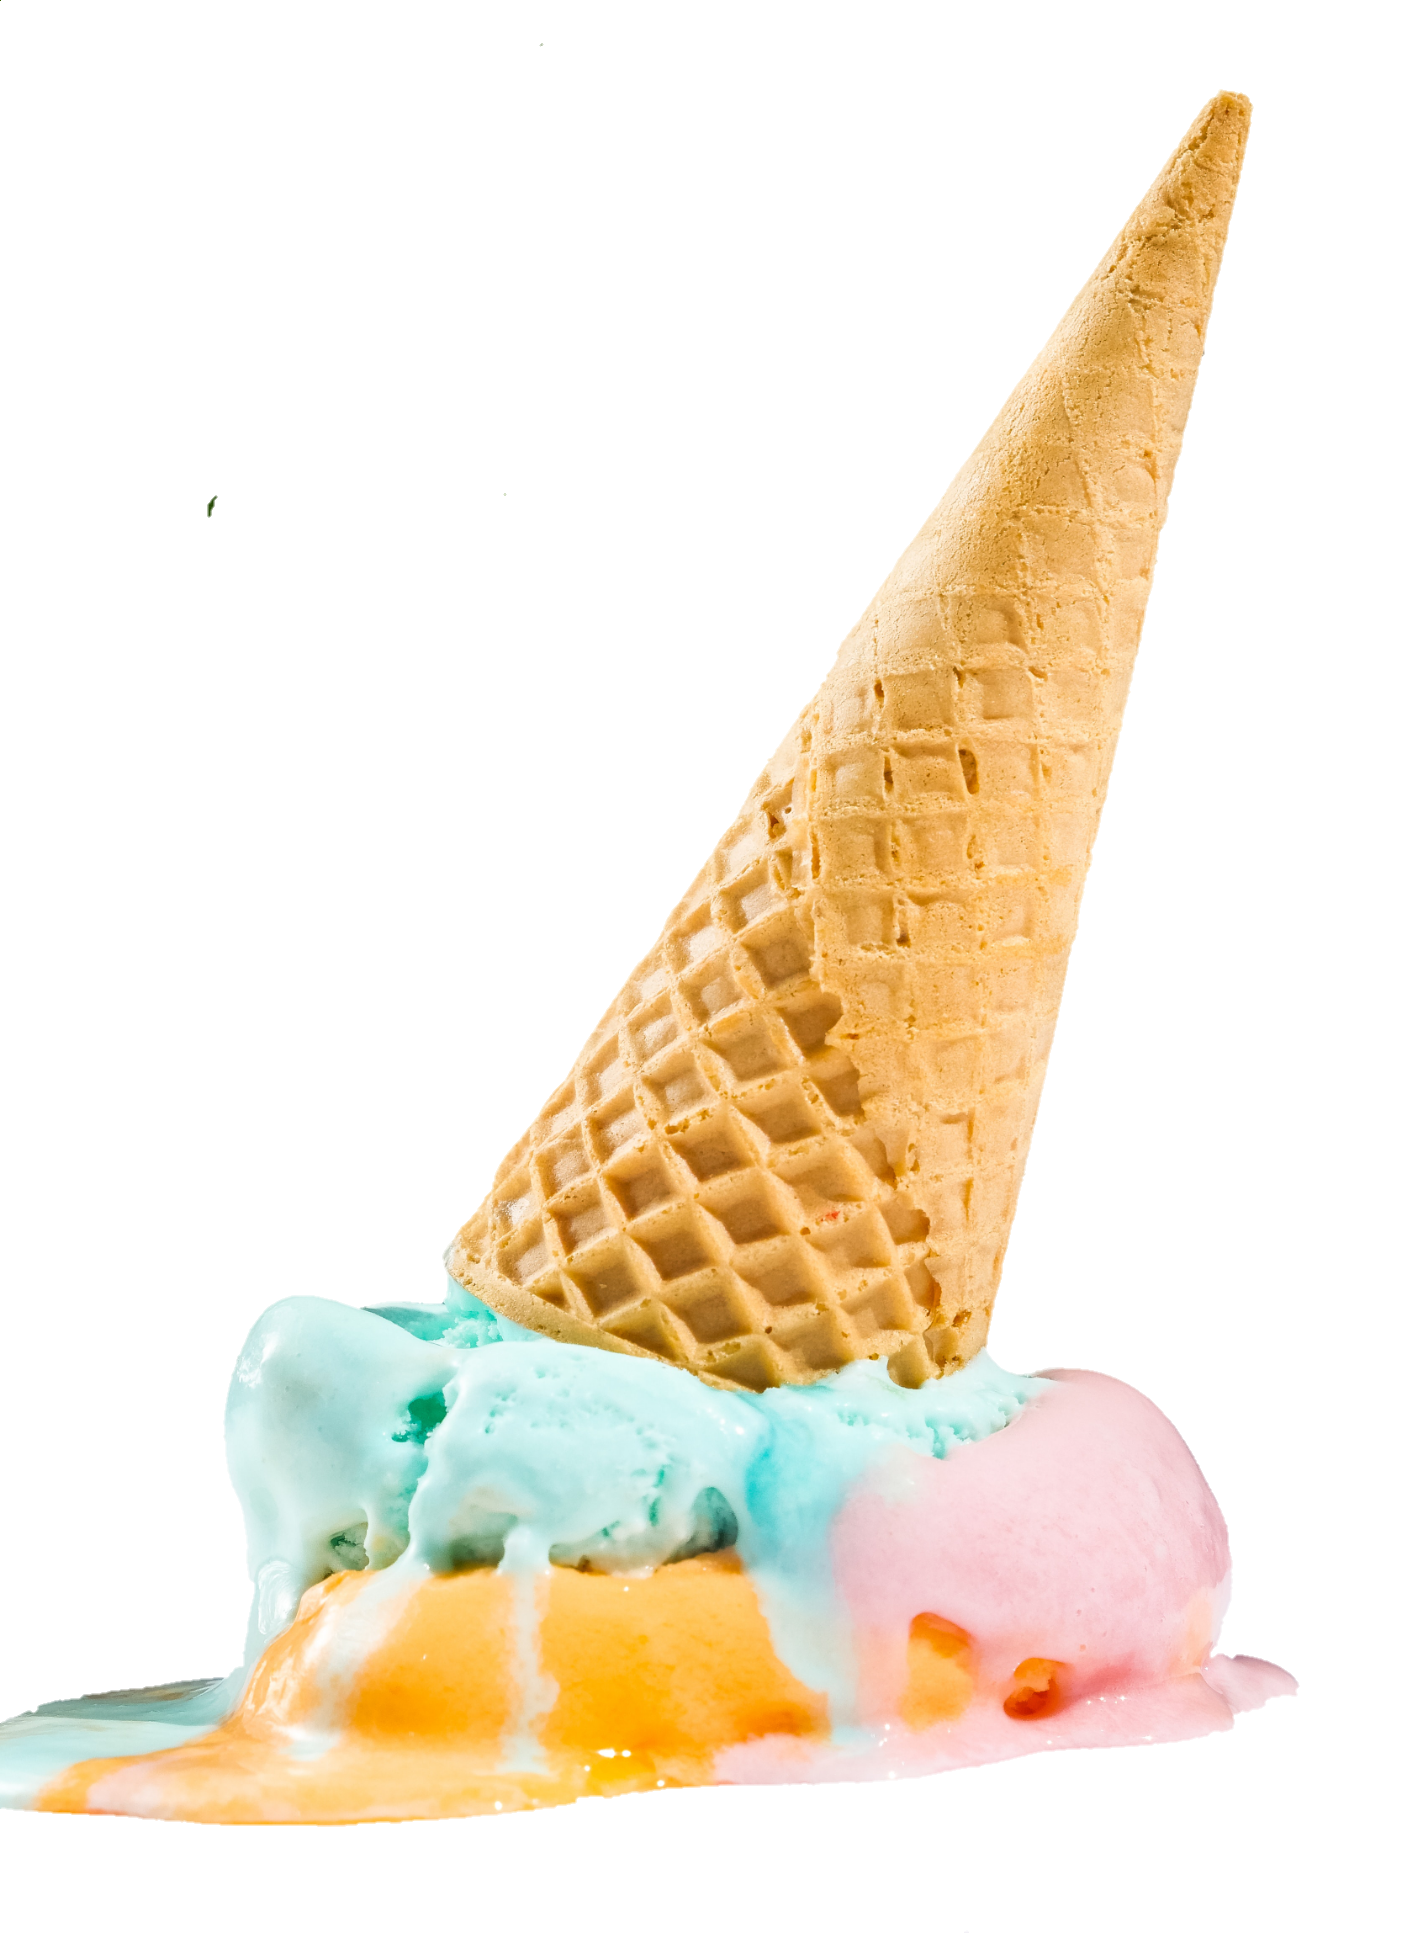 ice-cream-png-image-from-pngfre-39